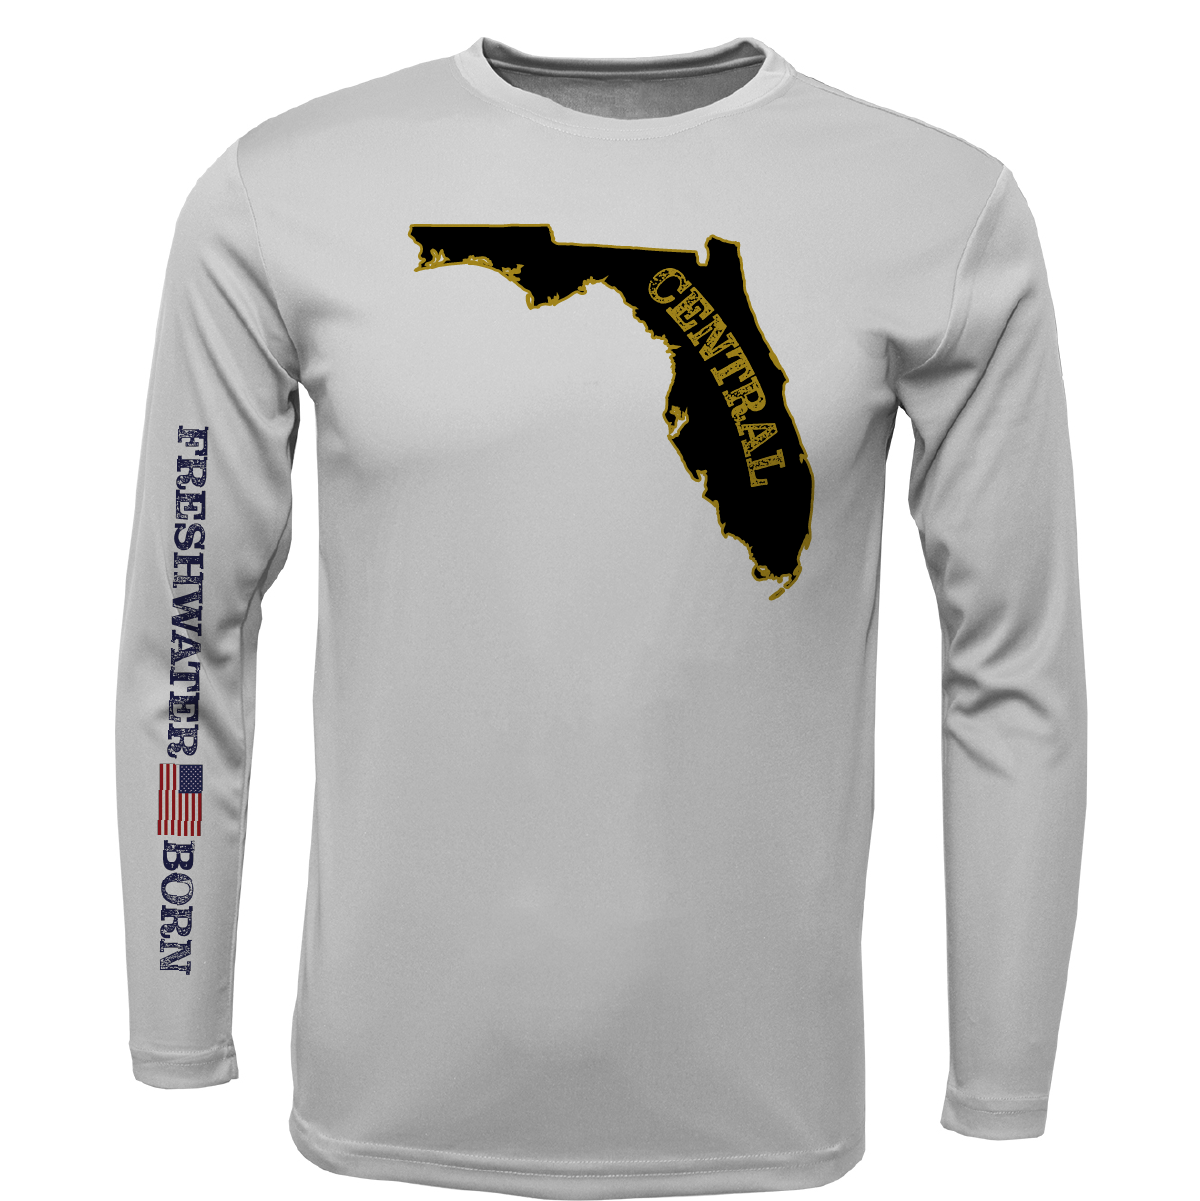 UCF Black and Gold Freshwater Born Boy's Long Sleeve UPF 50+ Dry-Fit Shirt